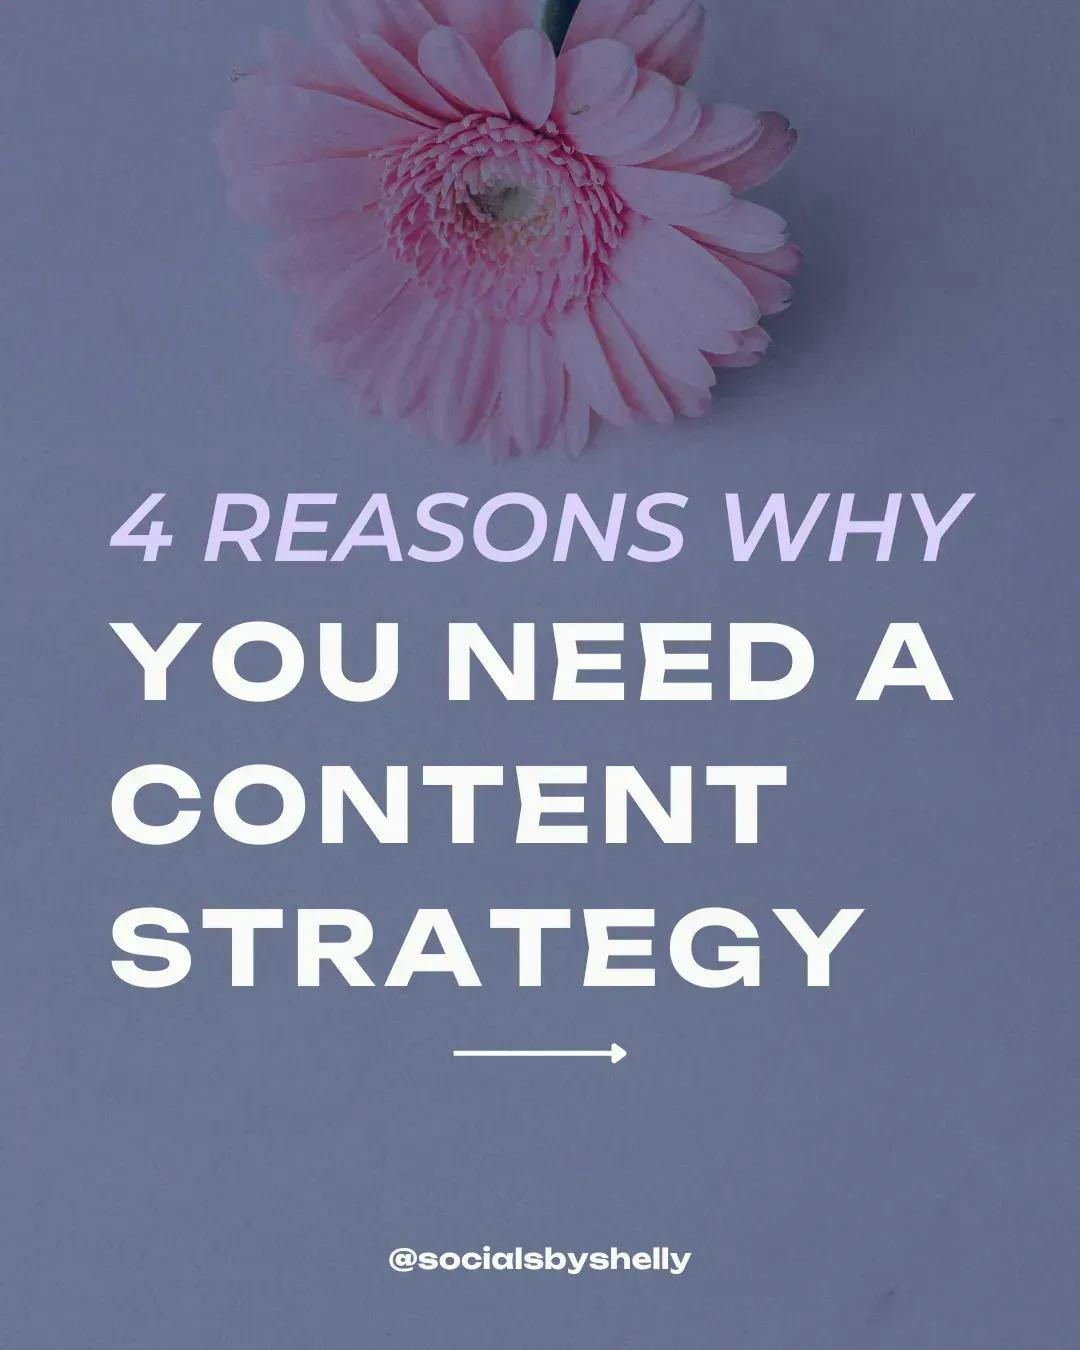 Instagram post title: 4 REASONS WHY YOU NEED A CONTENT STRATEGY